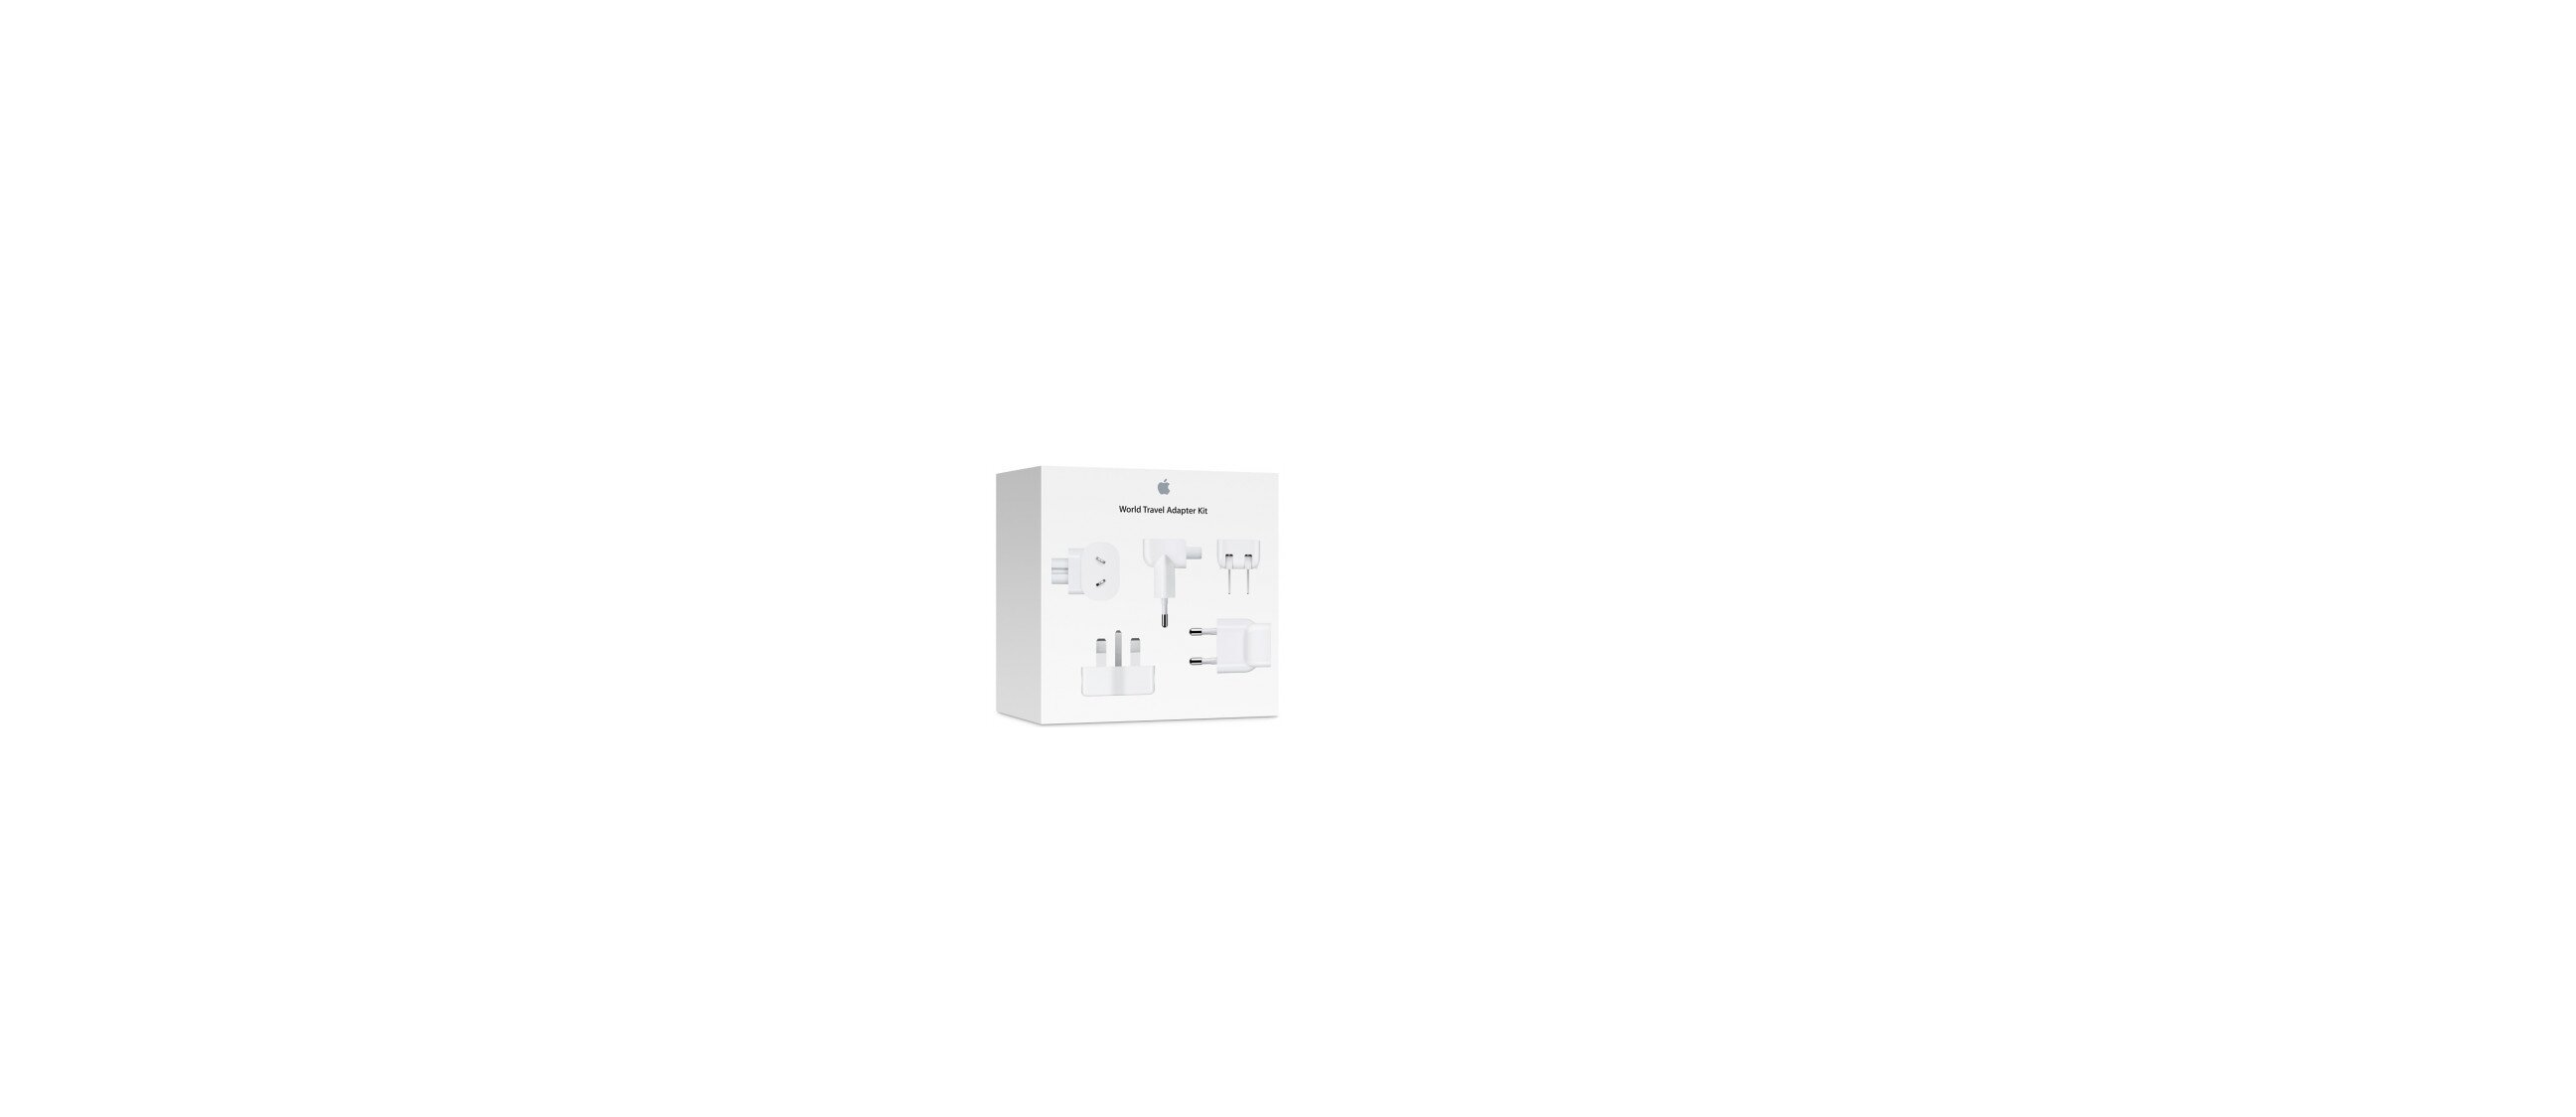 Apple-World-Travel-Adapter-Kit-User-Manual-featured-img